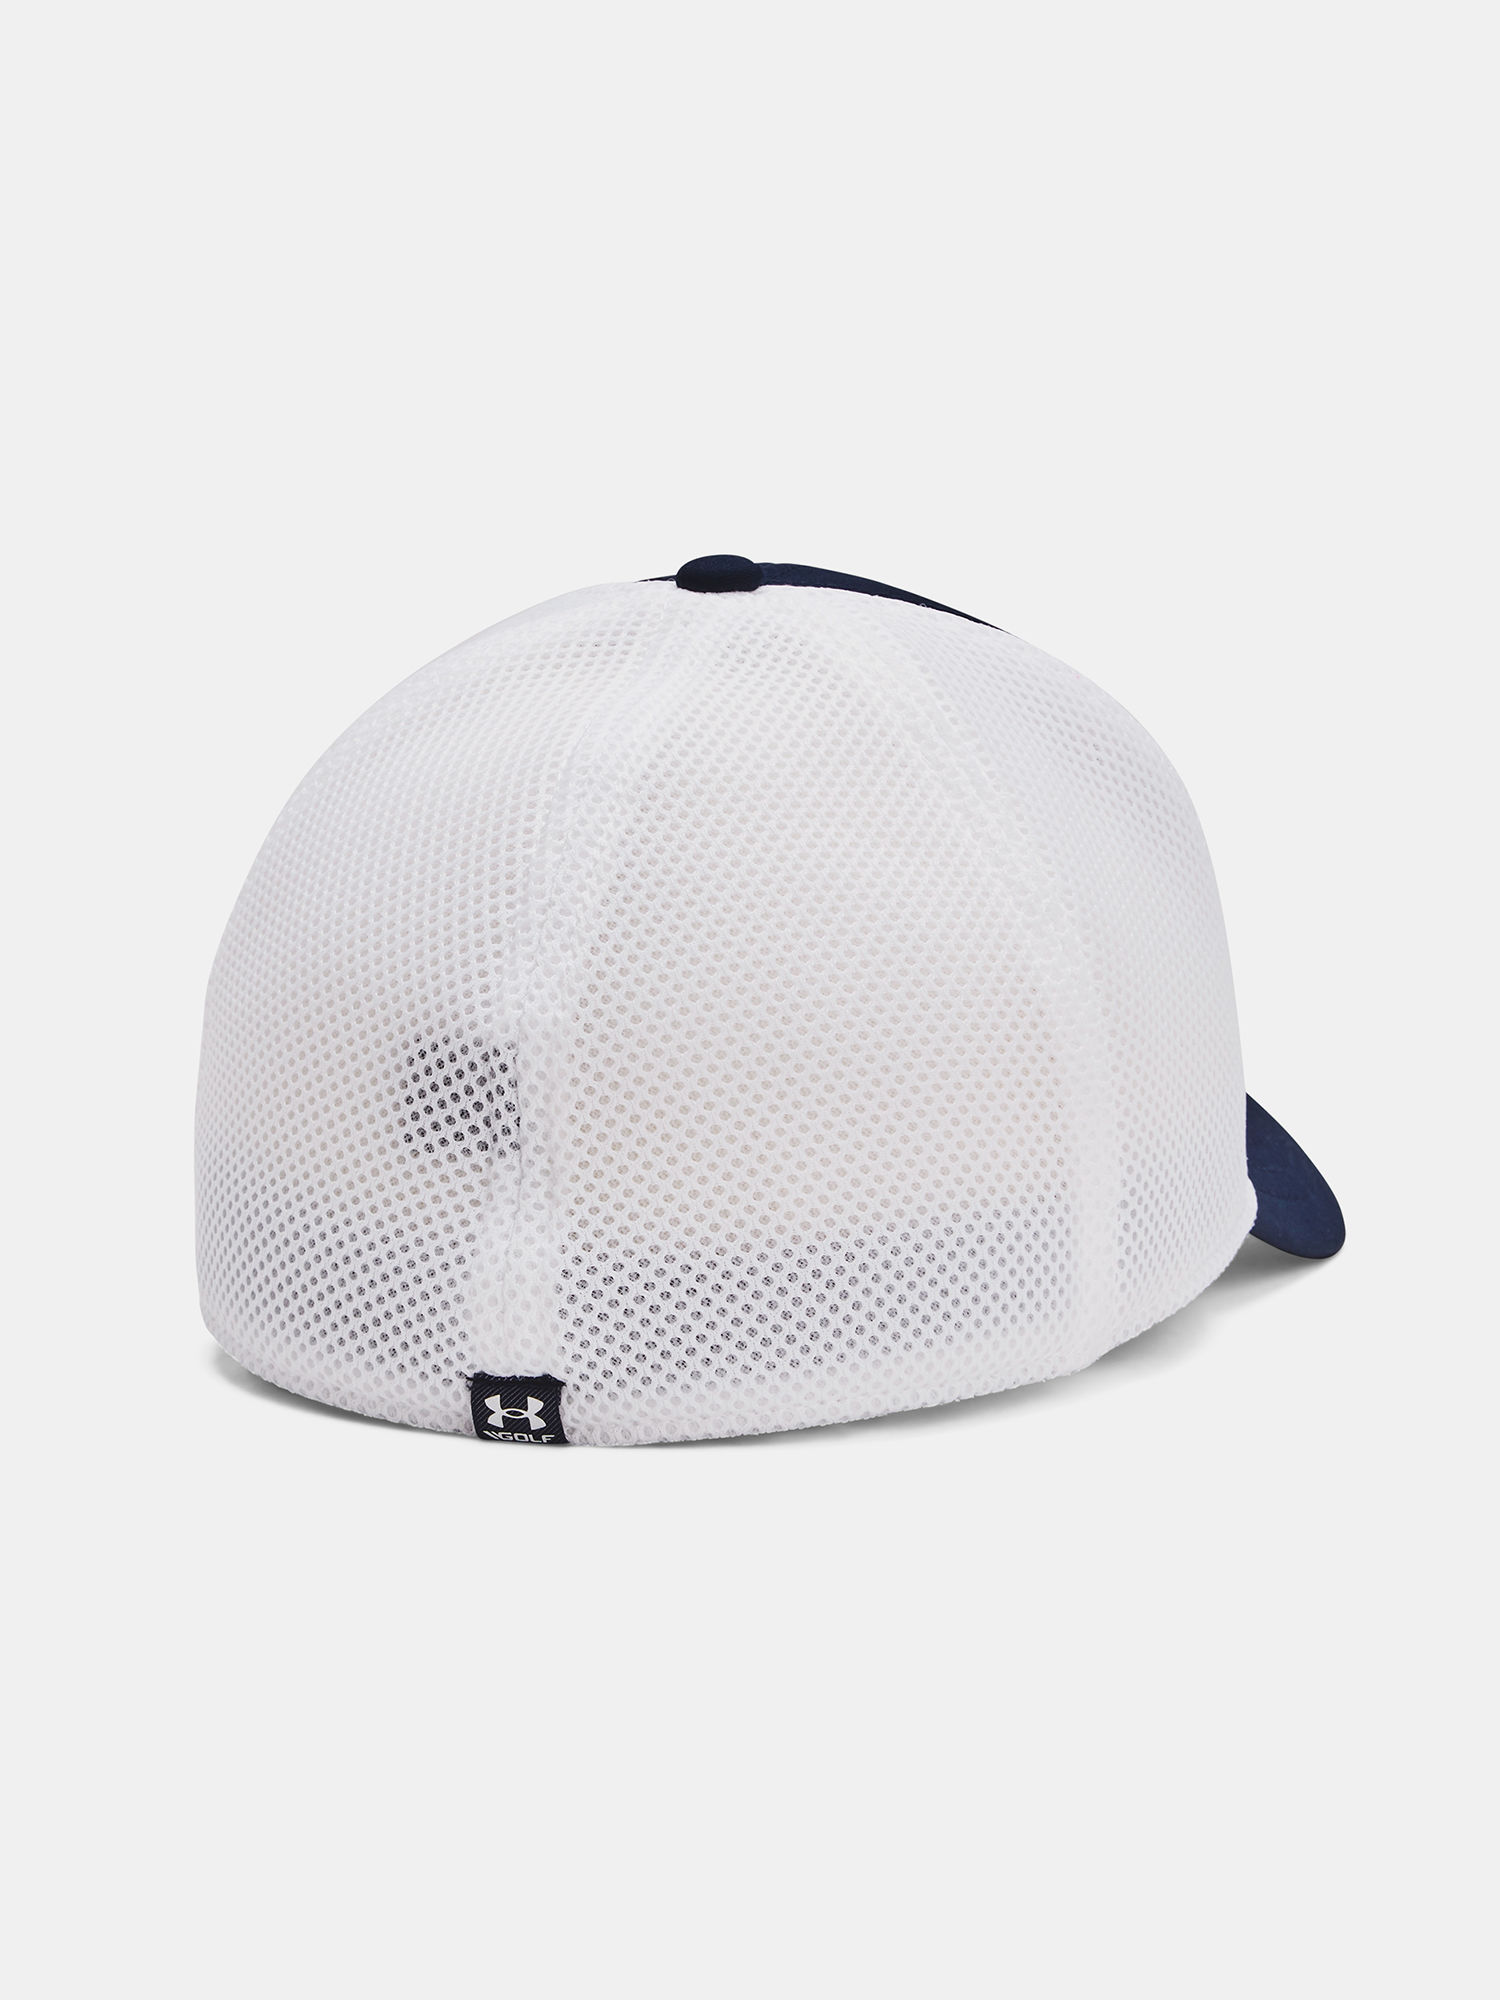 Kšiltovka Under Armour Iso-chill Driver Mesh-NVY (2)